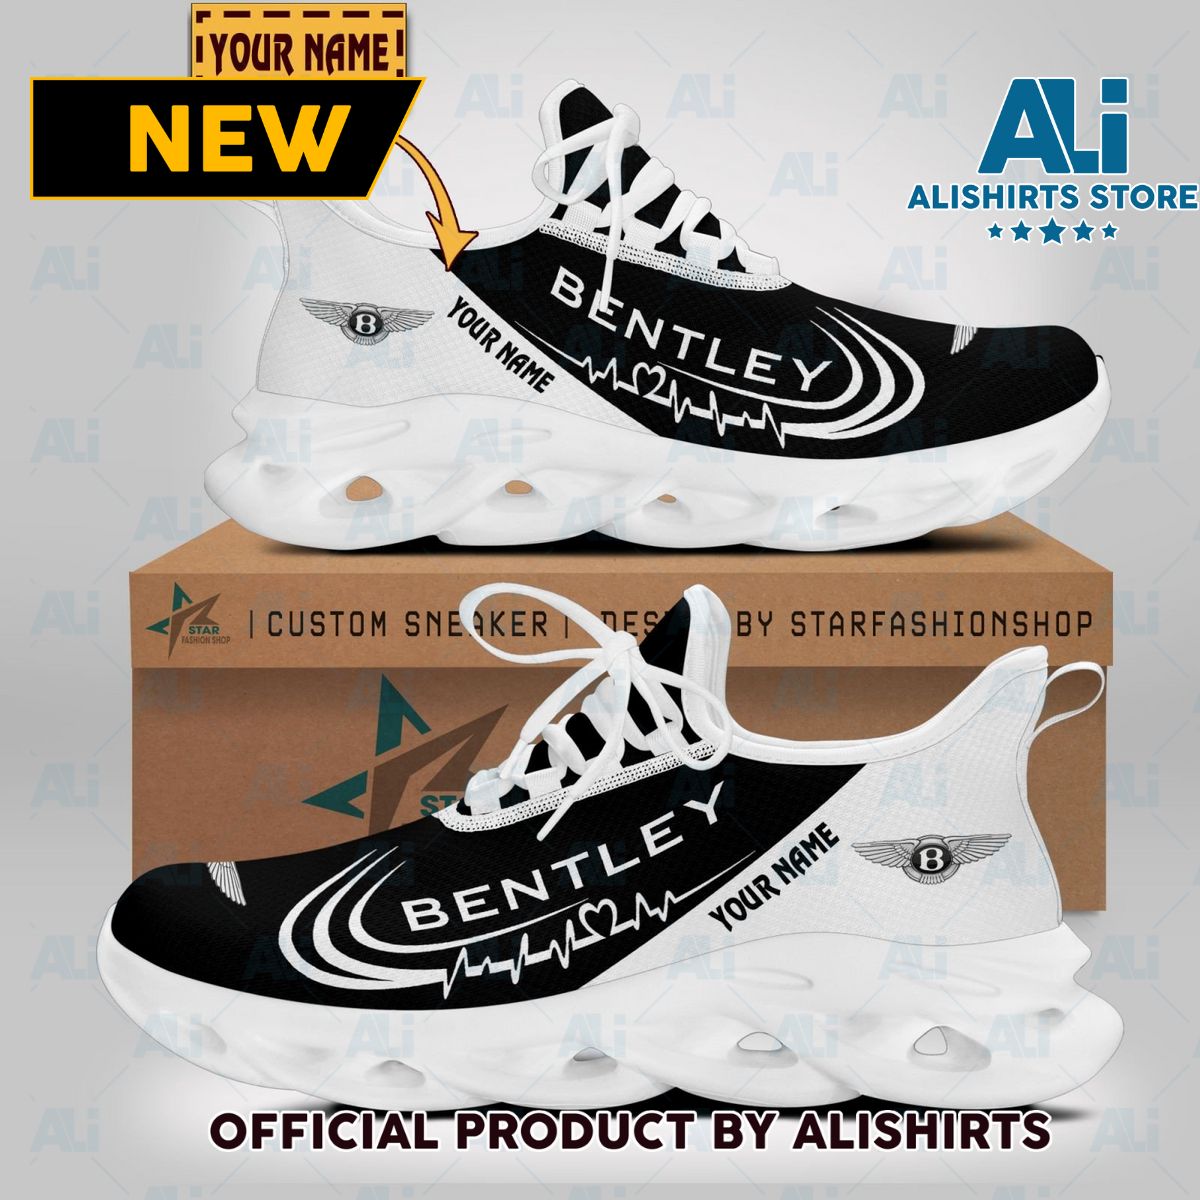 Bentley Car Brand Lover Clunky Sneaker Max Soul Shoes